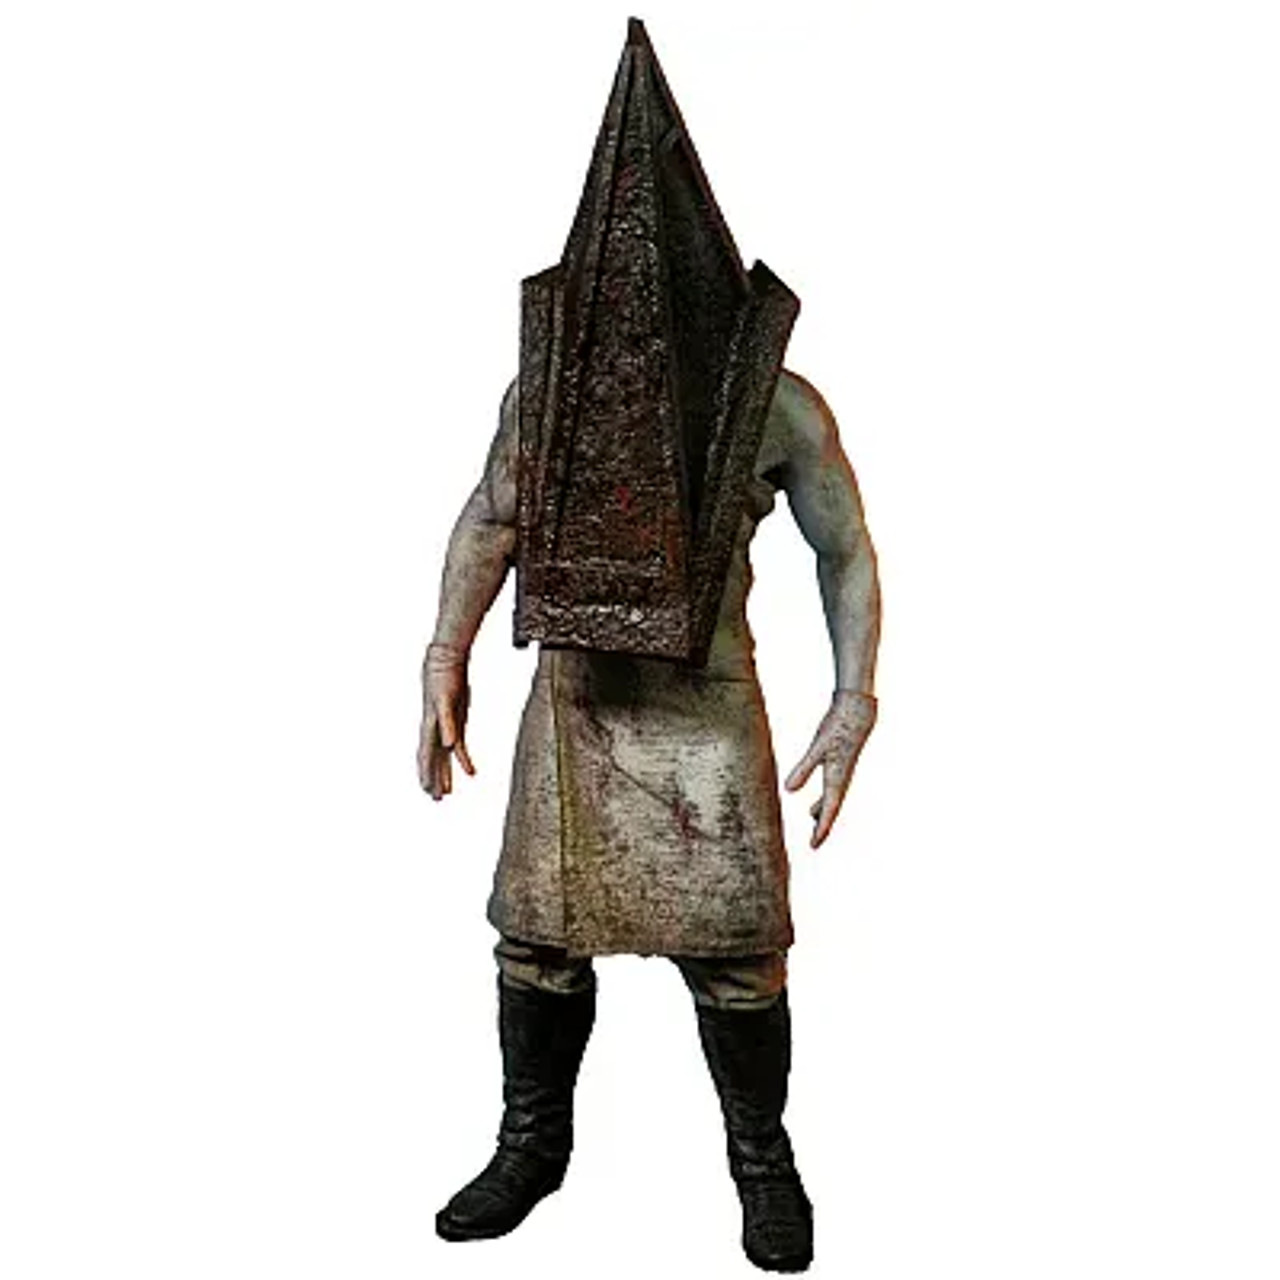 Pre-Order  Silent Hill 2 – Red Pyramid Thing Exclusive Edition